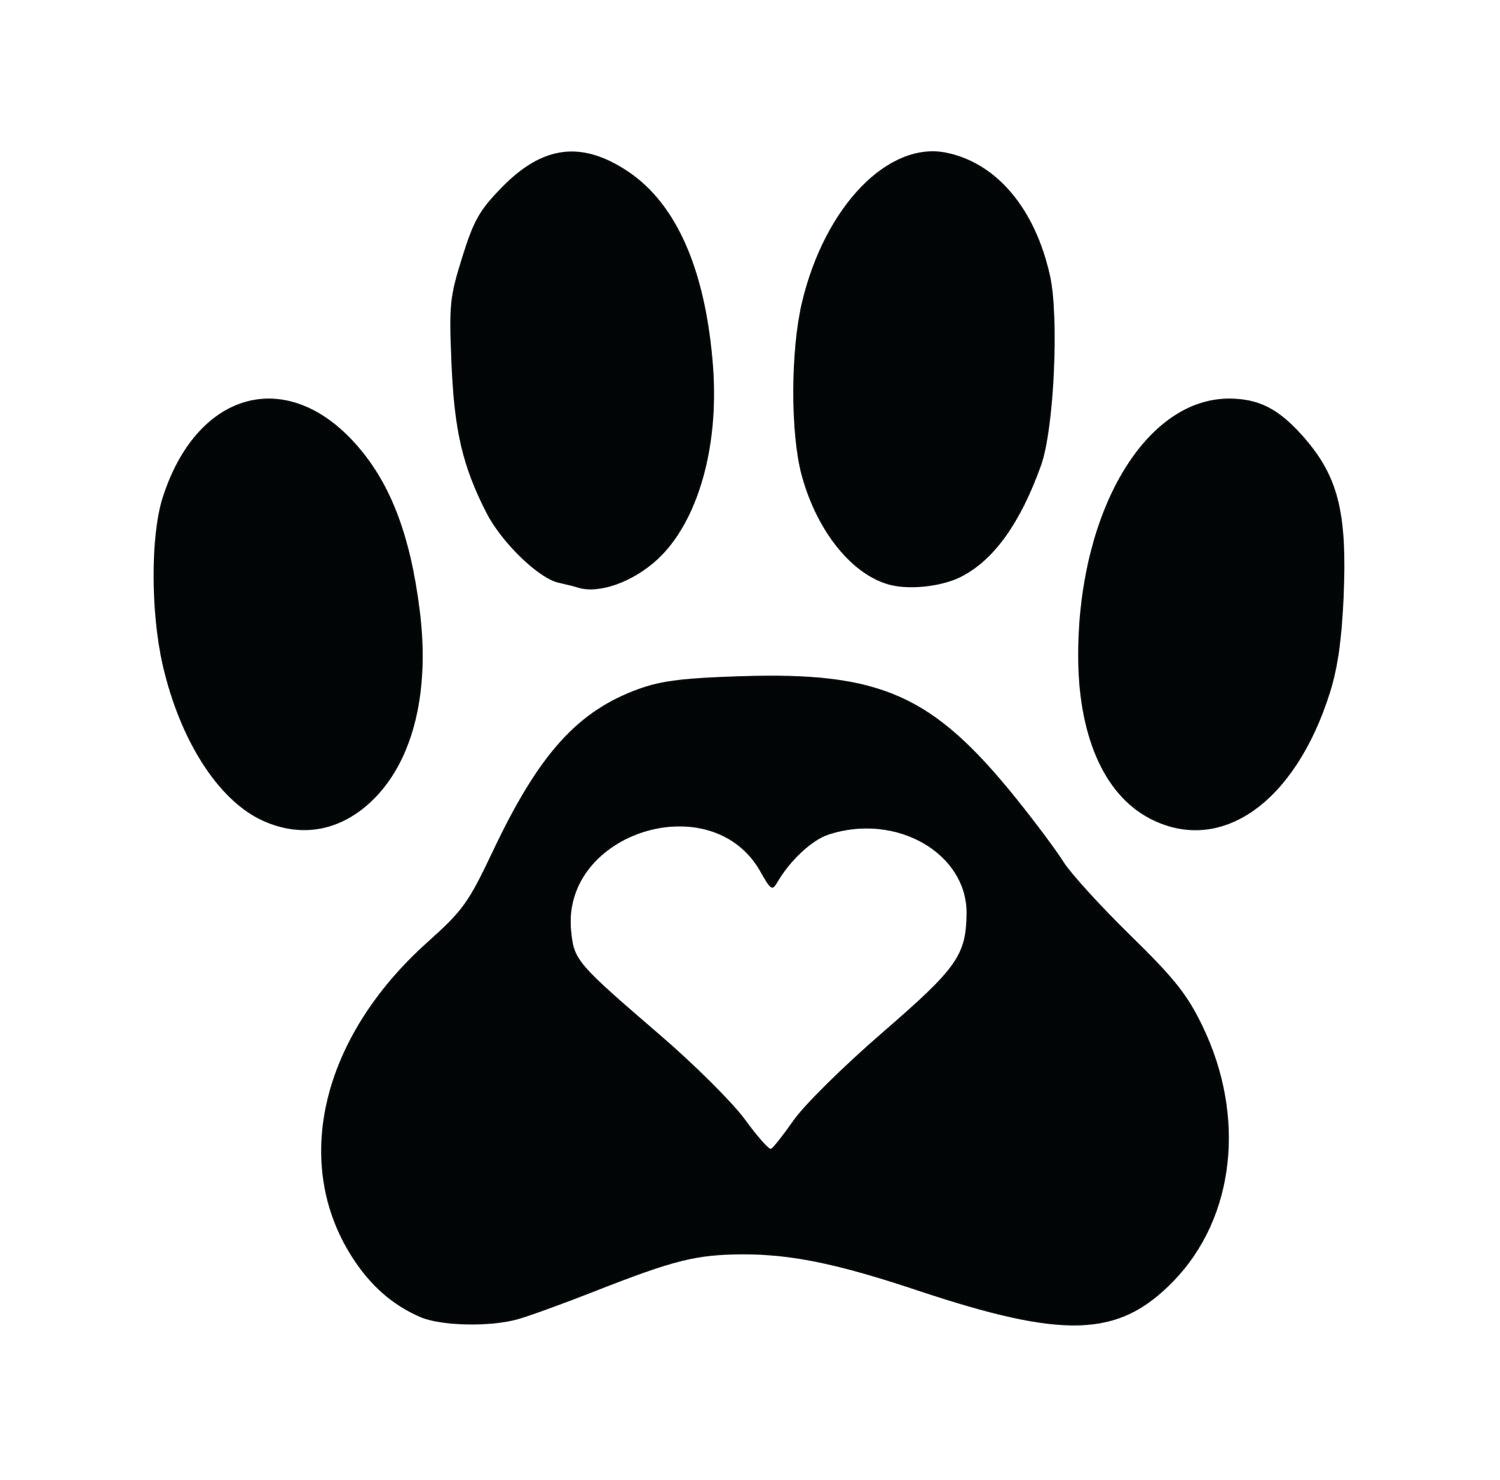 Pawprint Clipart Dawg Picture 3059035 Pawprint Clipart Dawg